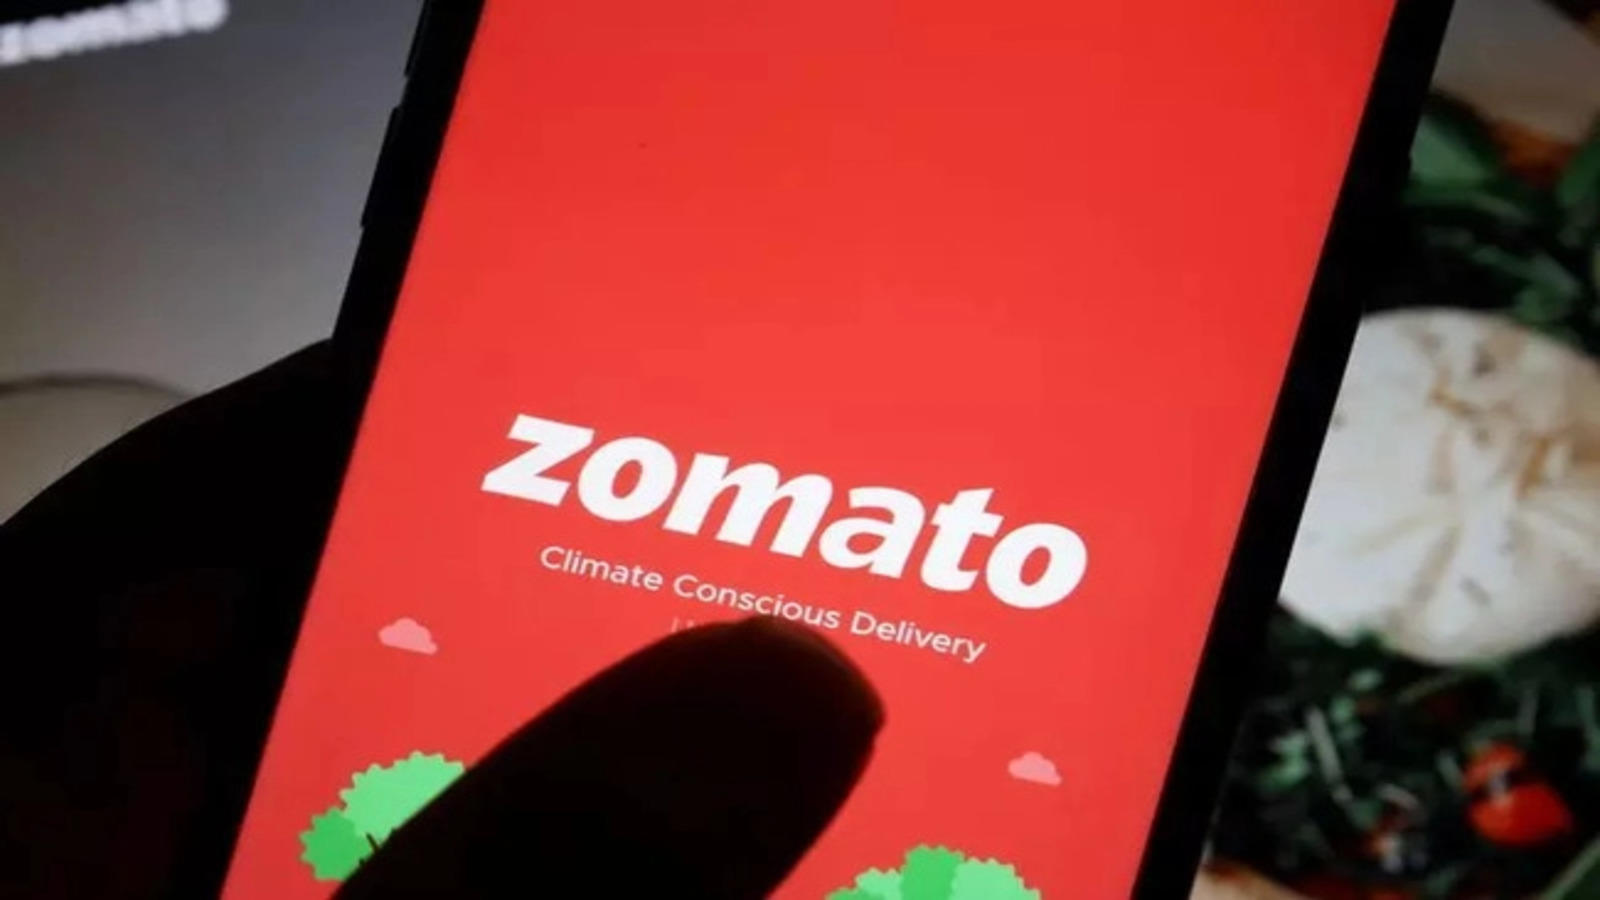 Zomato largest gainer among food delivery companies across the world. Has the stock peaked out?